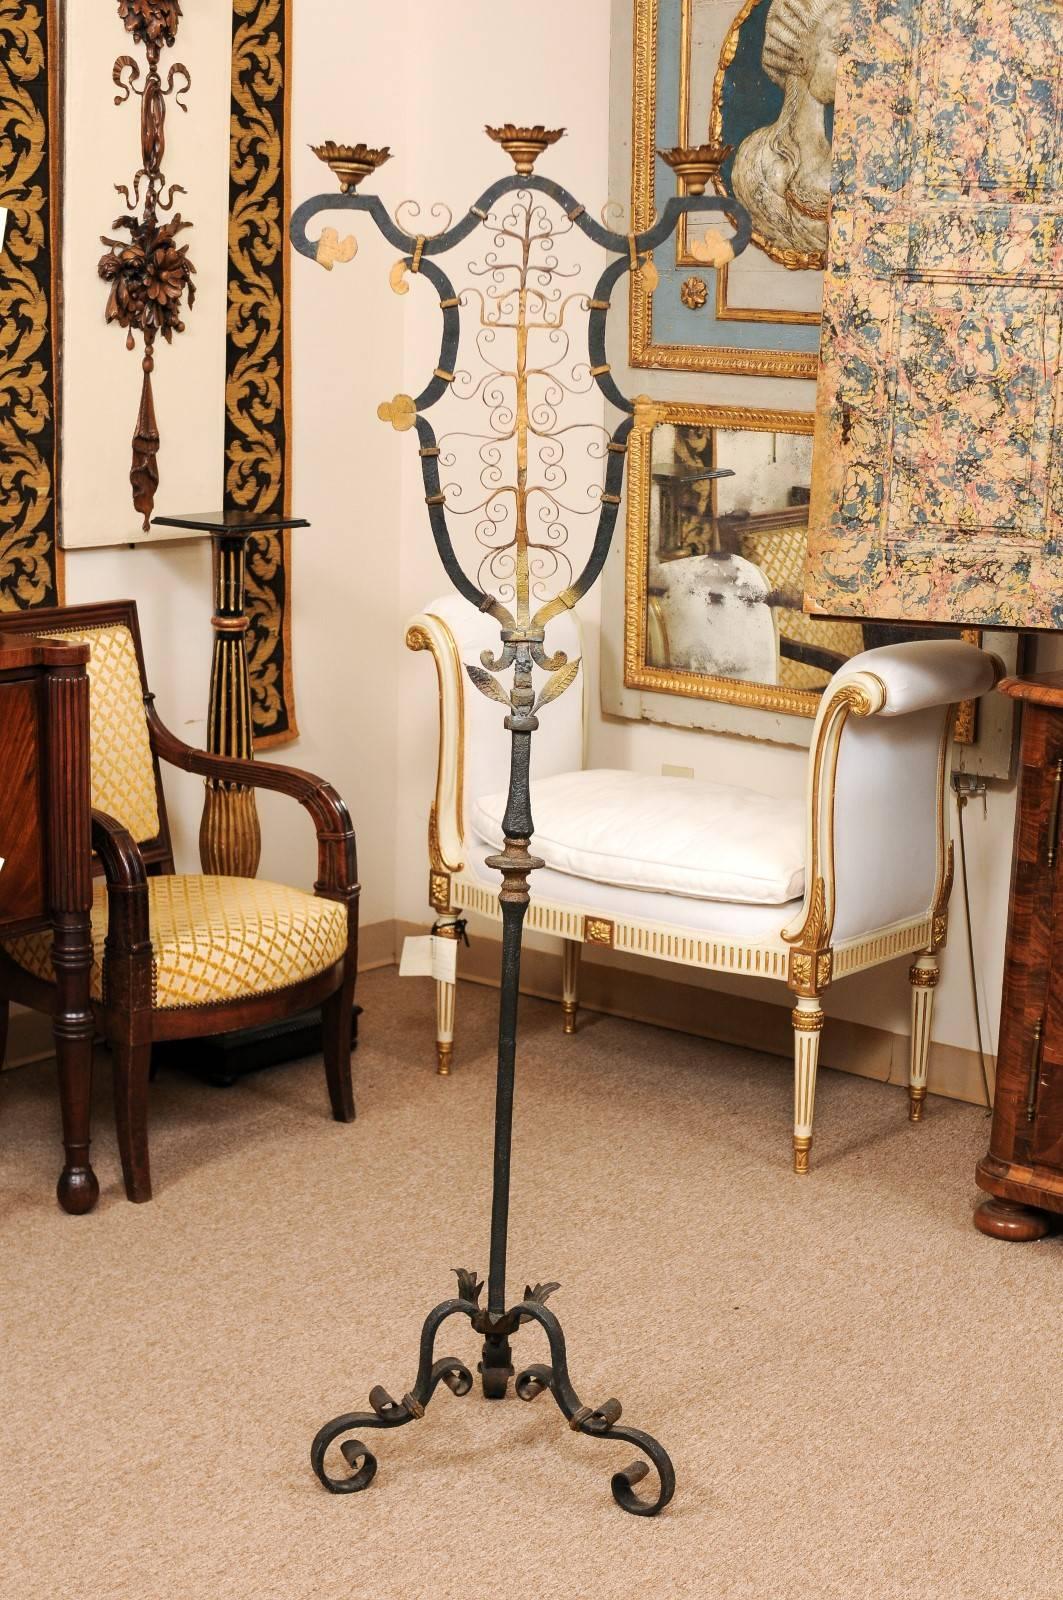 French wrought iron floor candelabra with gilt paint accent, ca. 1900.